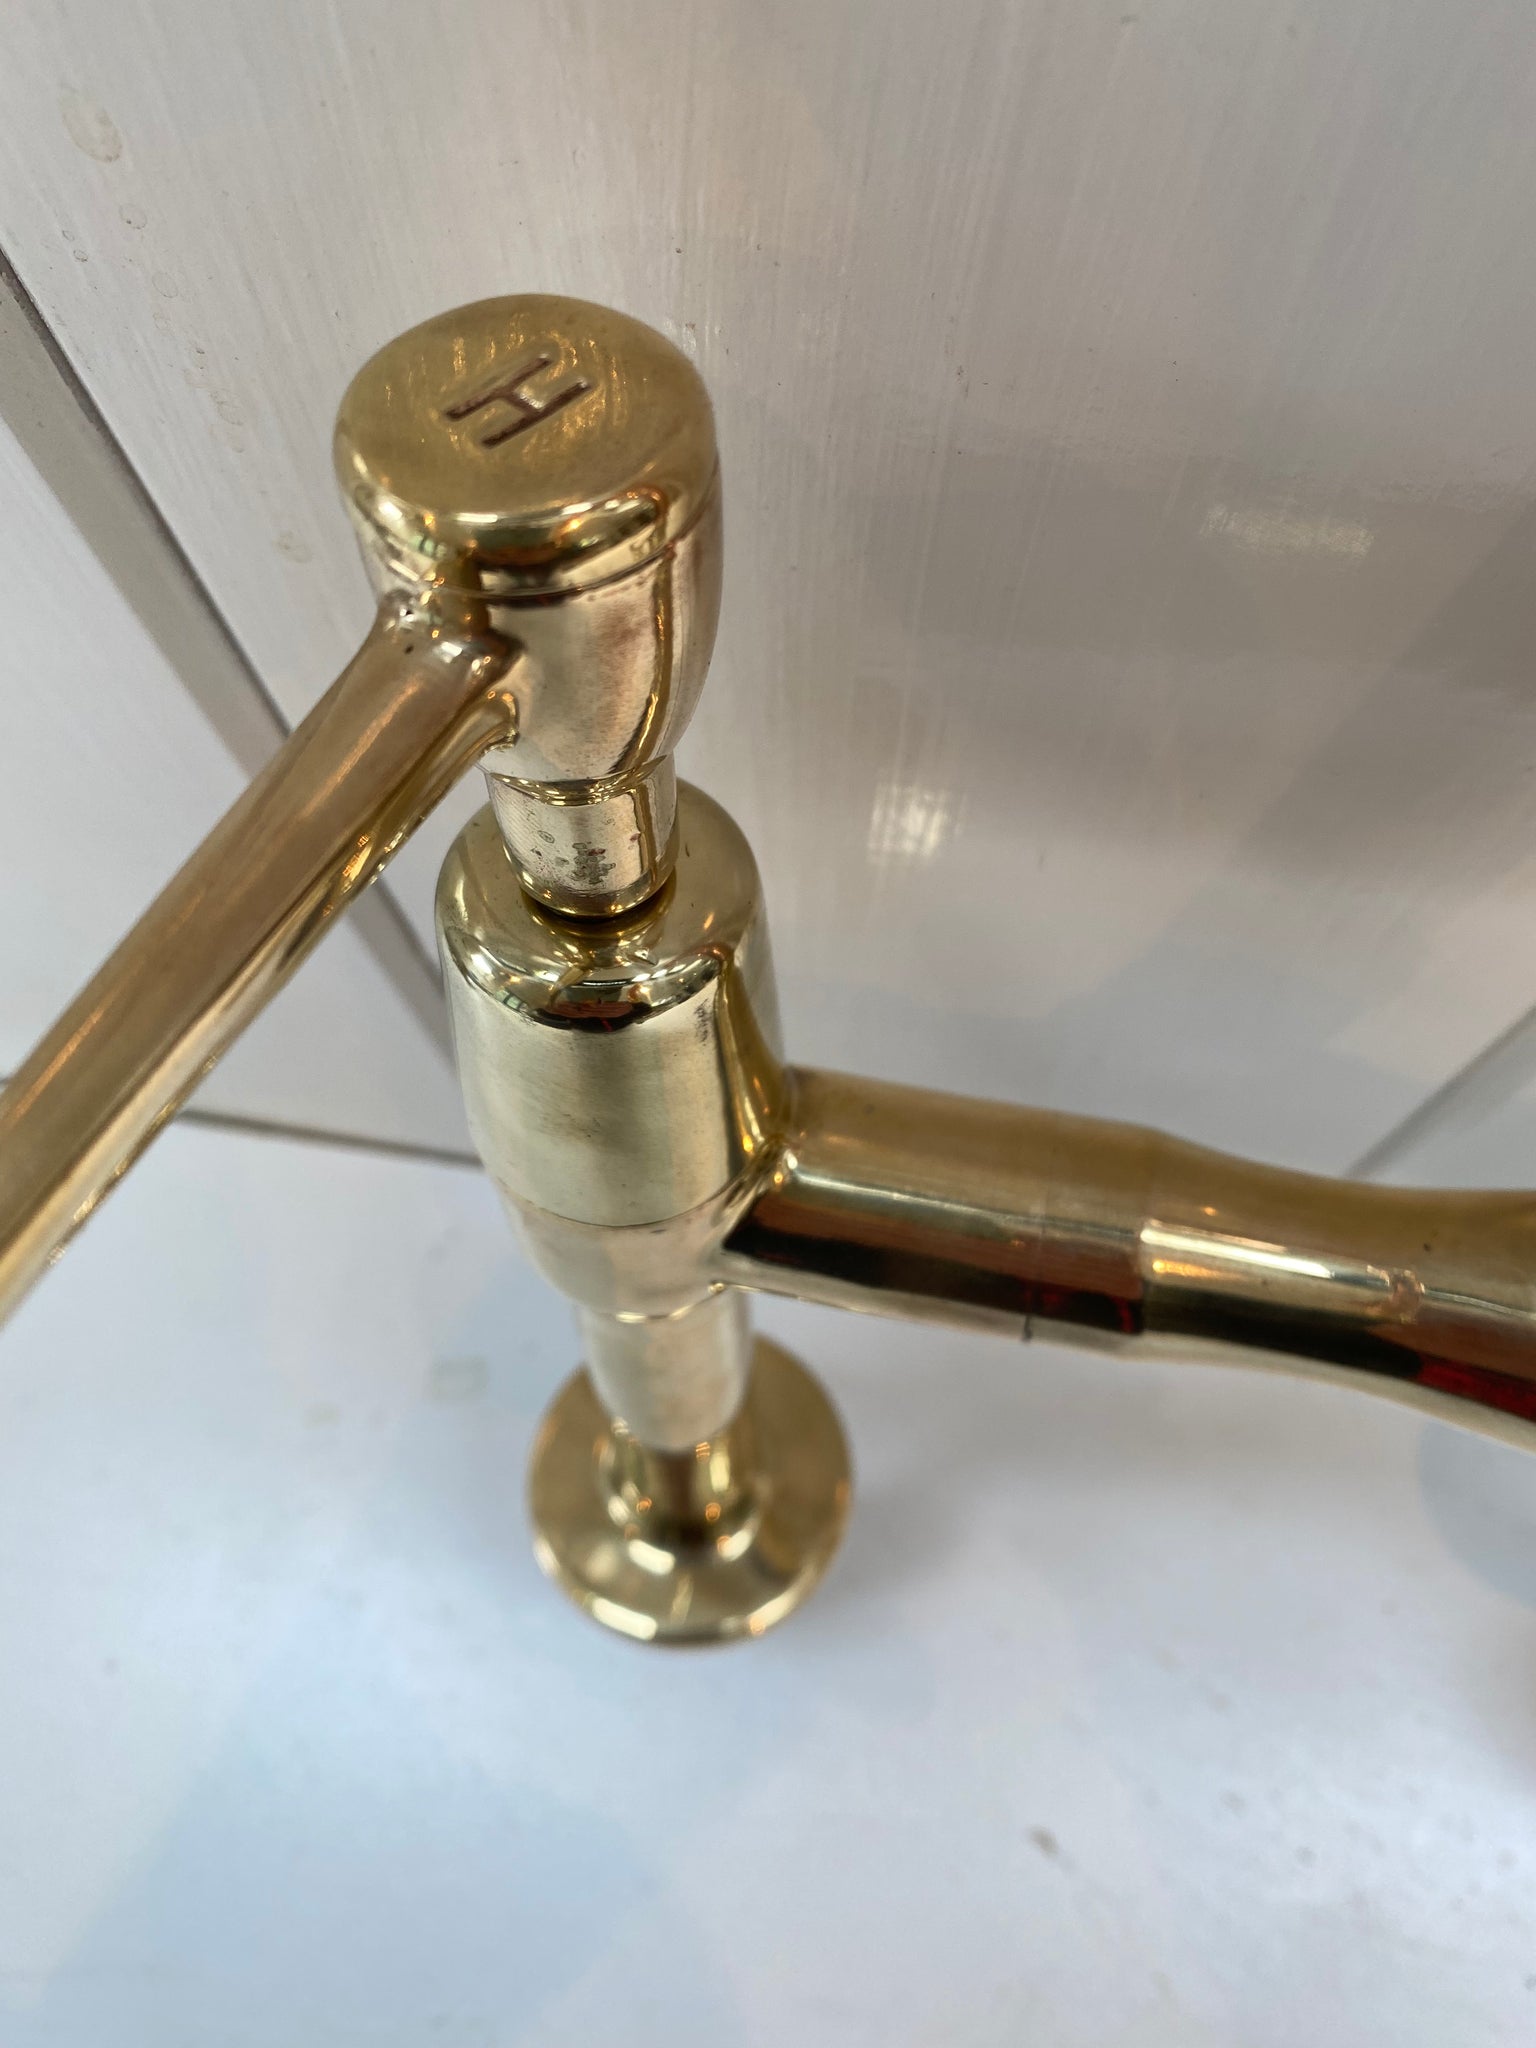 swan neck copper spouted lever mixer tap c.1930 by twyfords